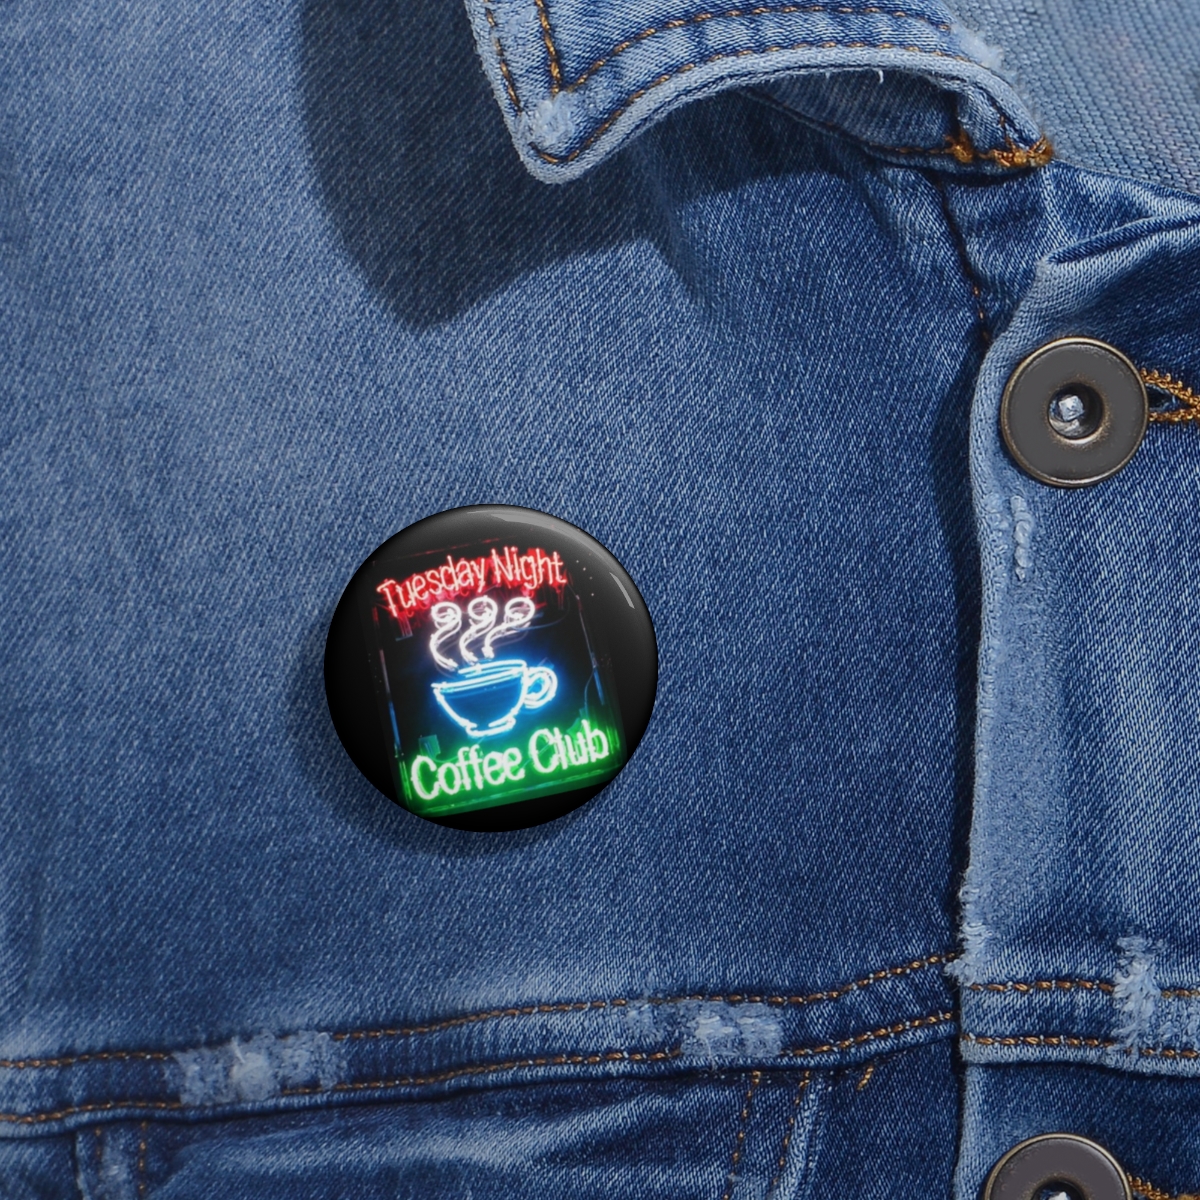 Custom Pin Buttons product thumbnail image